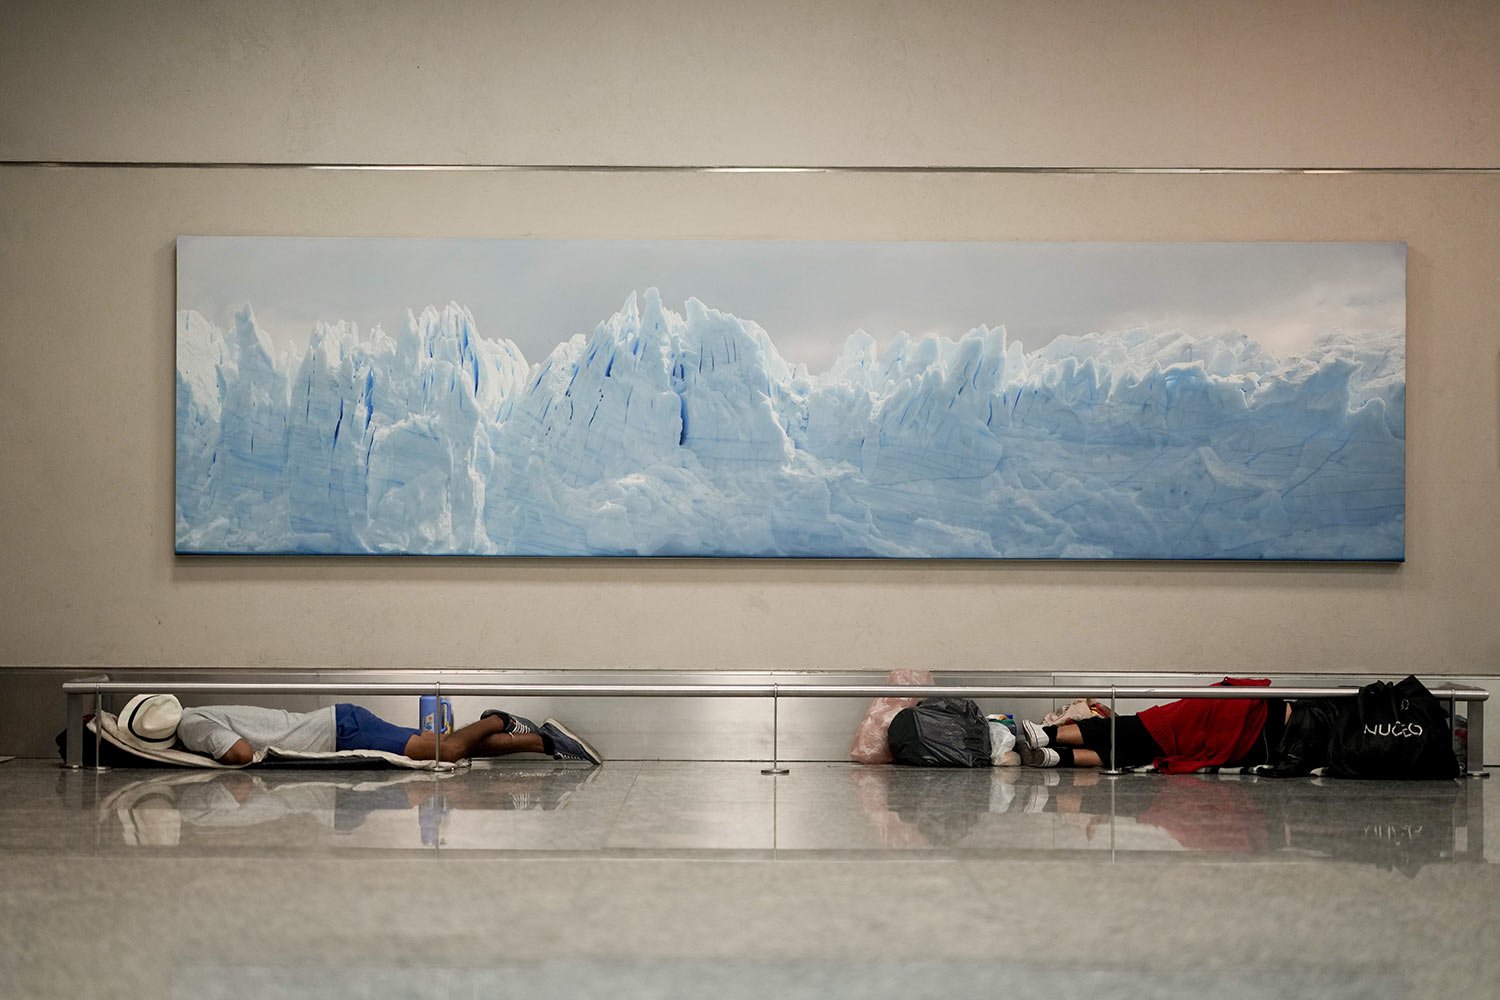  Homeless men sleep at the Jorge Newbery international airport under a photo of the Perito Moreno Glacier, in Buenos Aires, Argentina, April 6, 2023. More than 100 homeless people sleep nightly at the airport. (AP Photo/Natacha Pisarenko) 